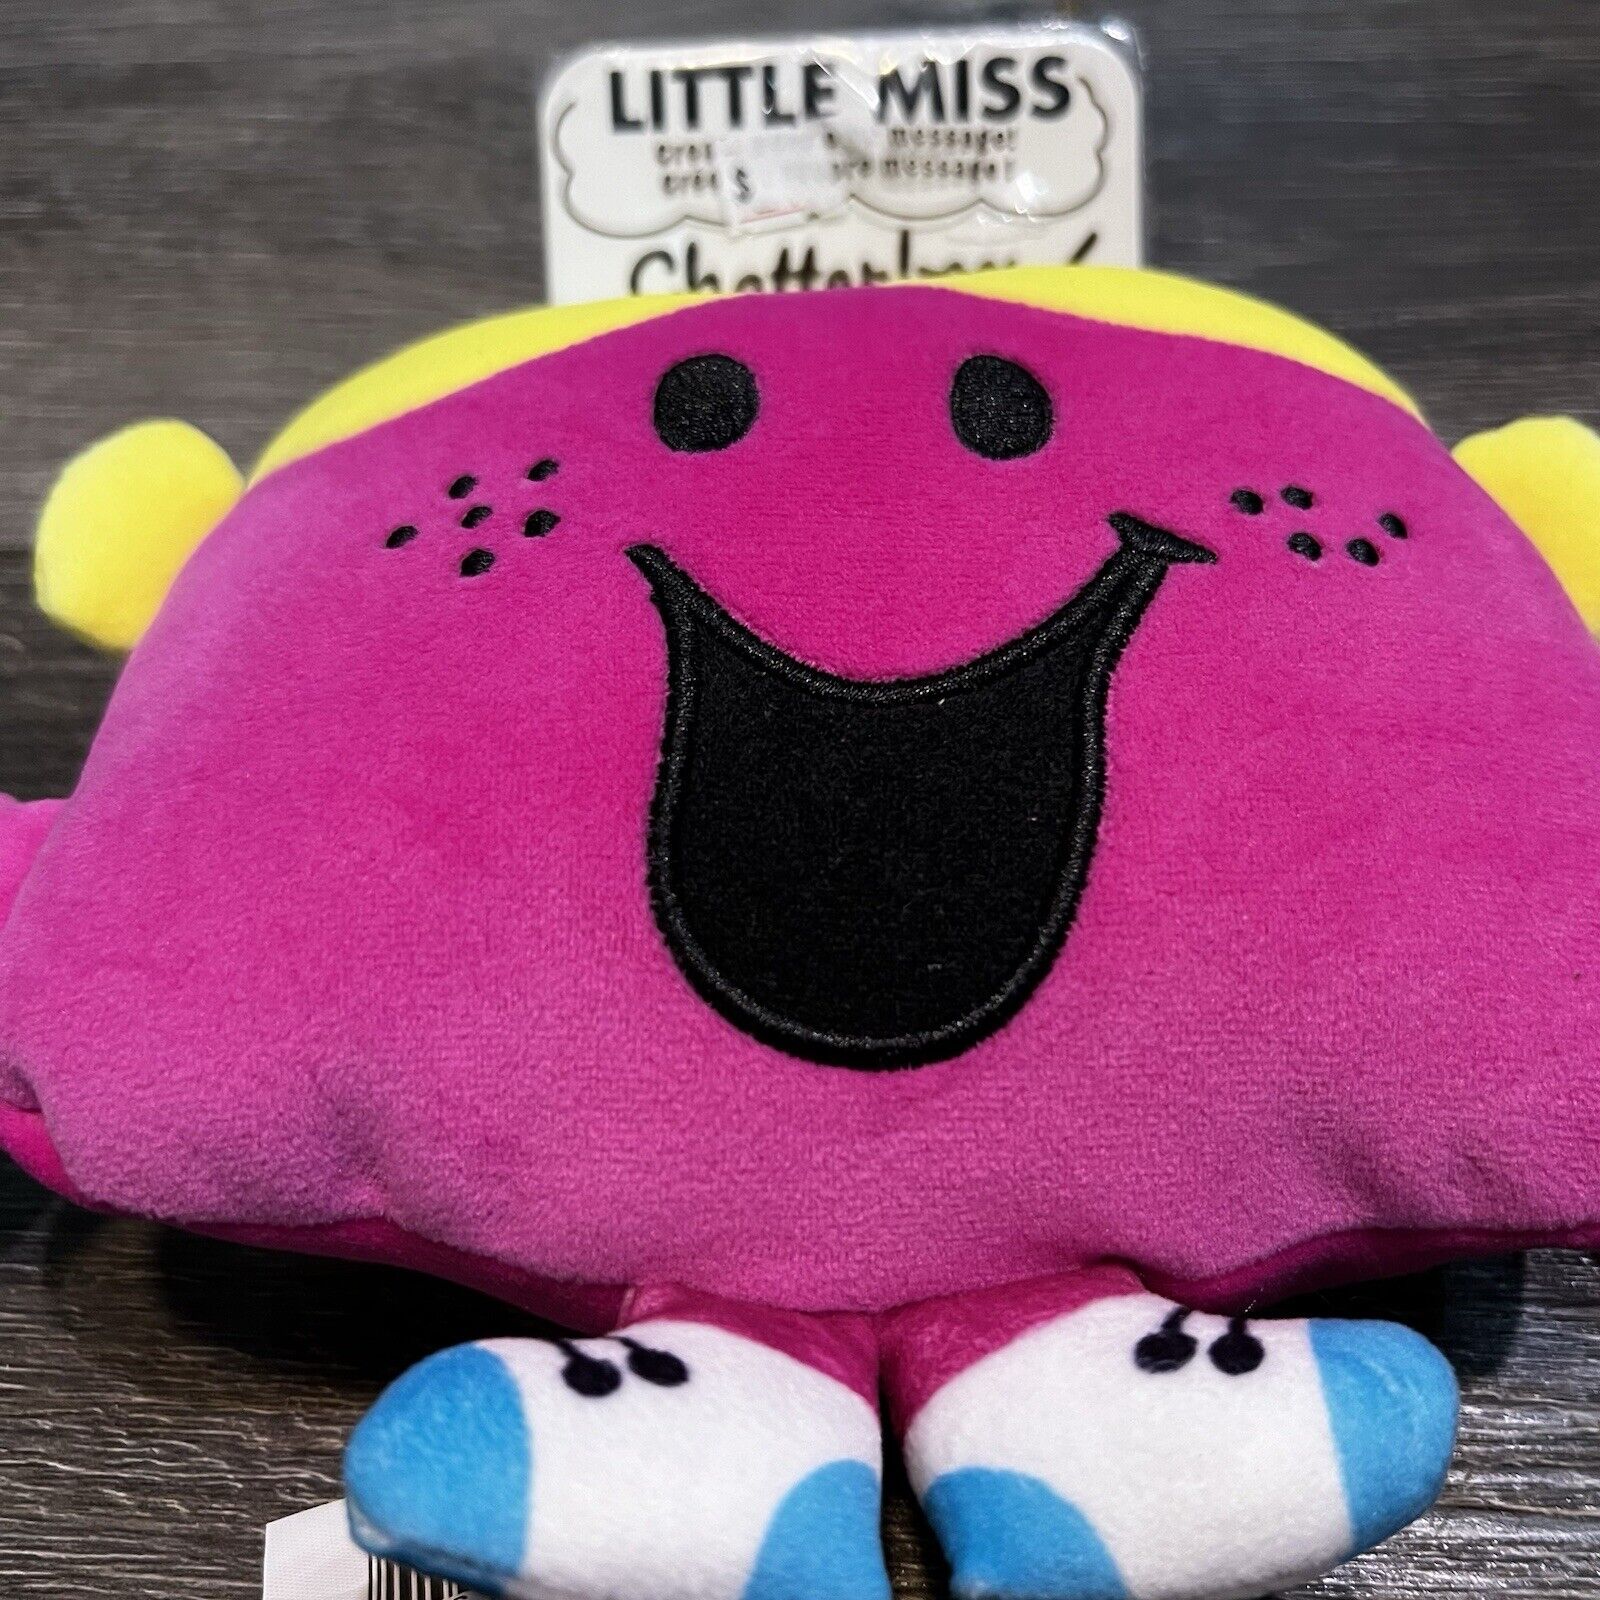 Little Miss Chatterbox The Mr. Men Show Plush Toy NEW WITH TAG. VGC